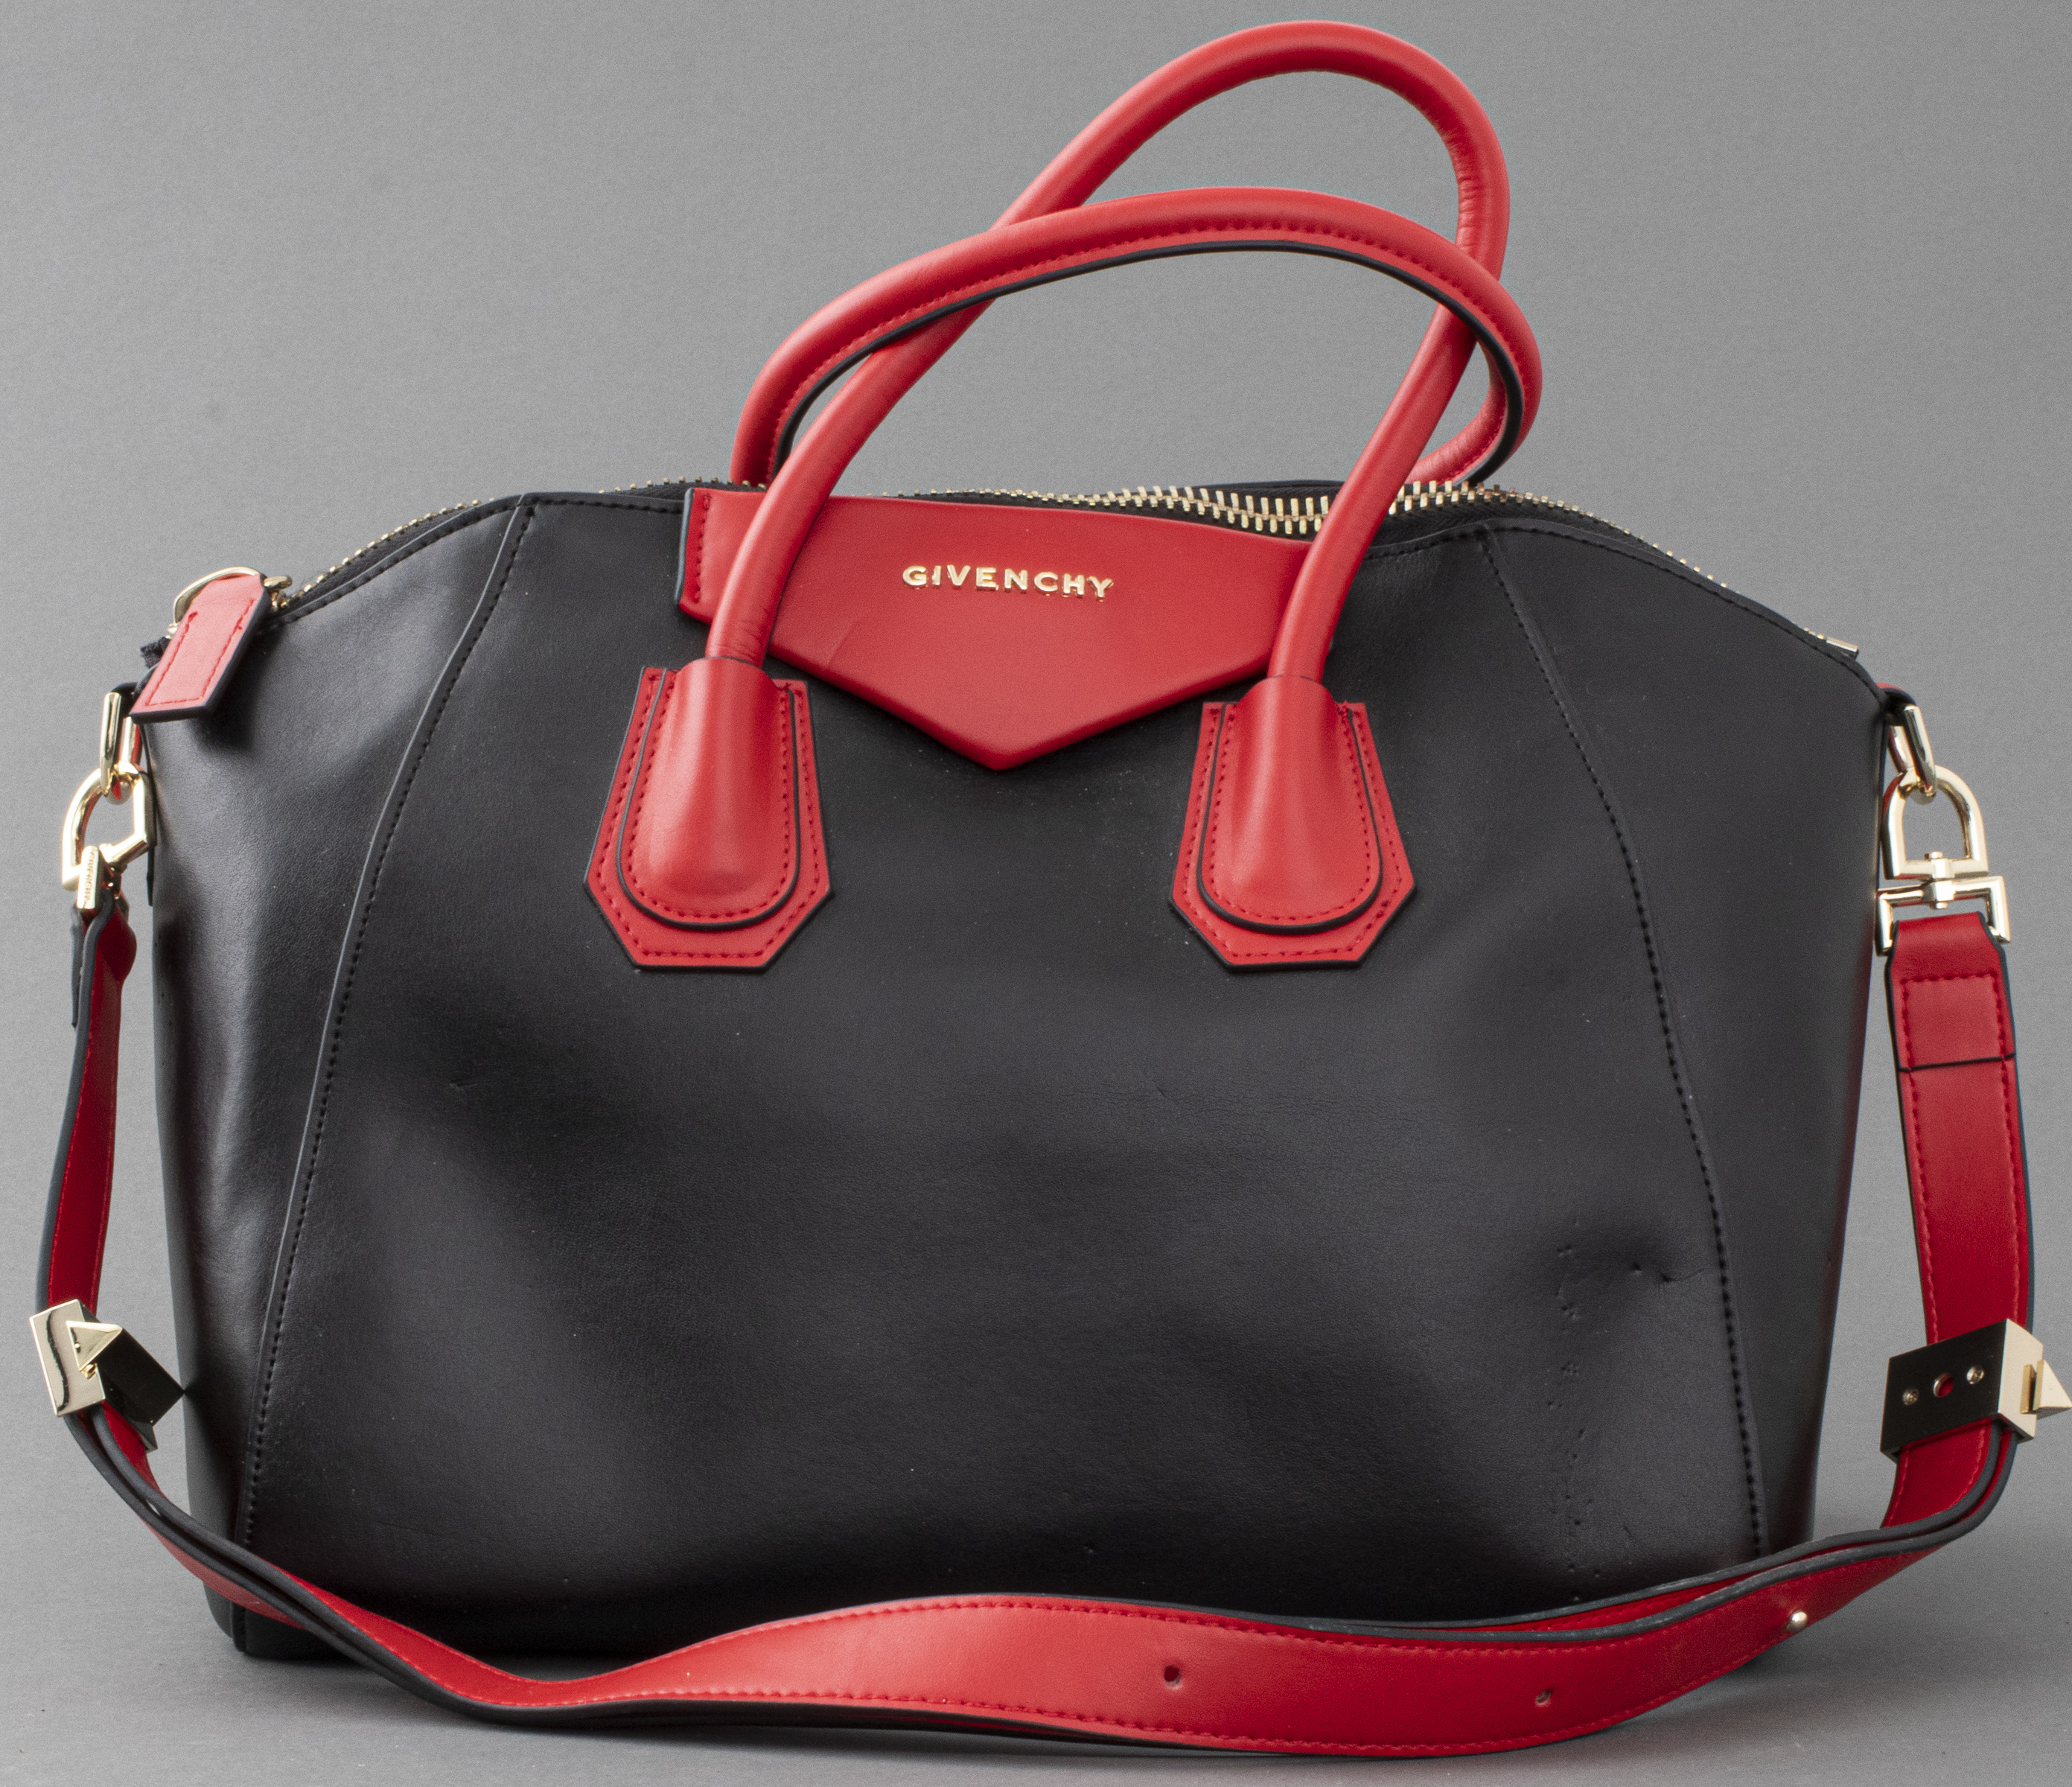 GIVENCHY BLACK AND RED LEATHER